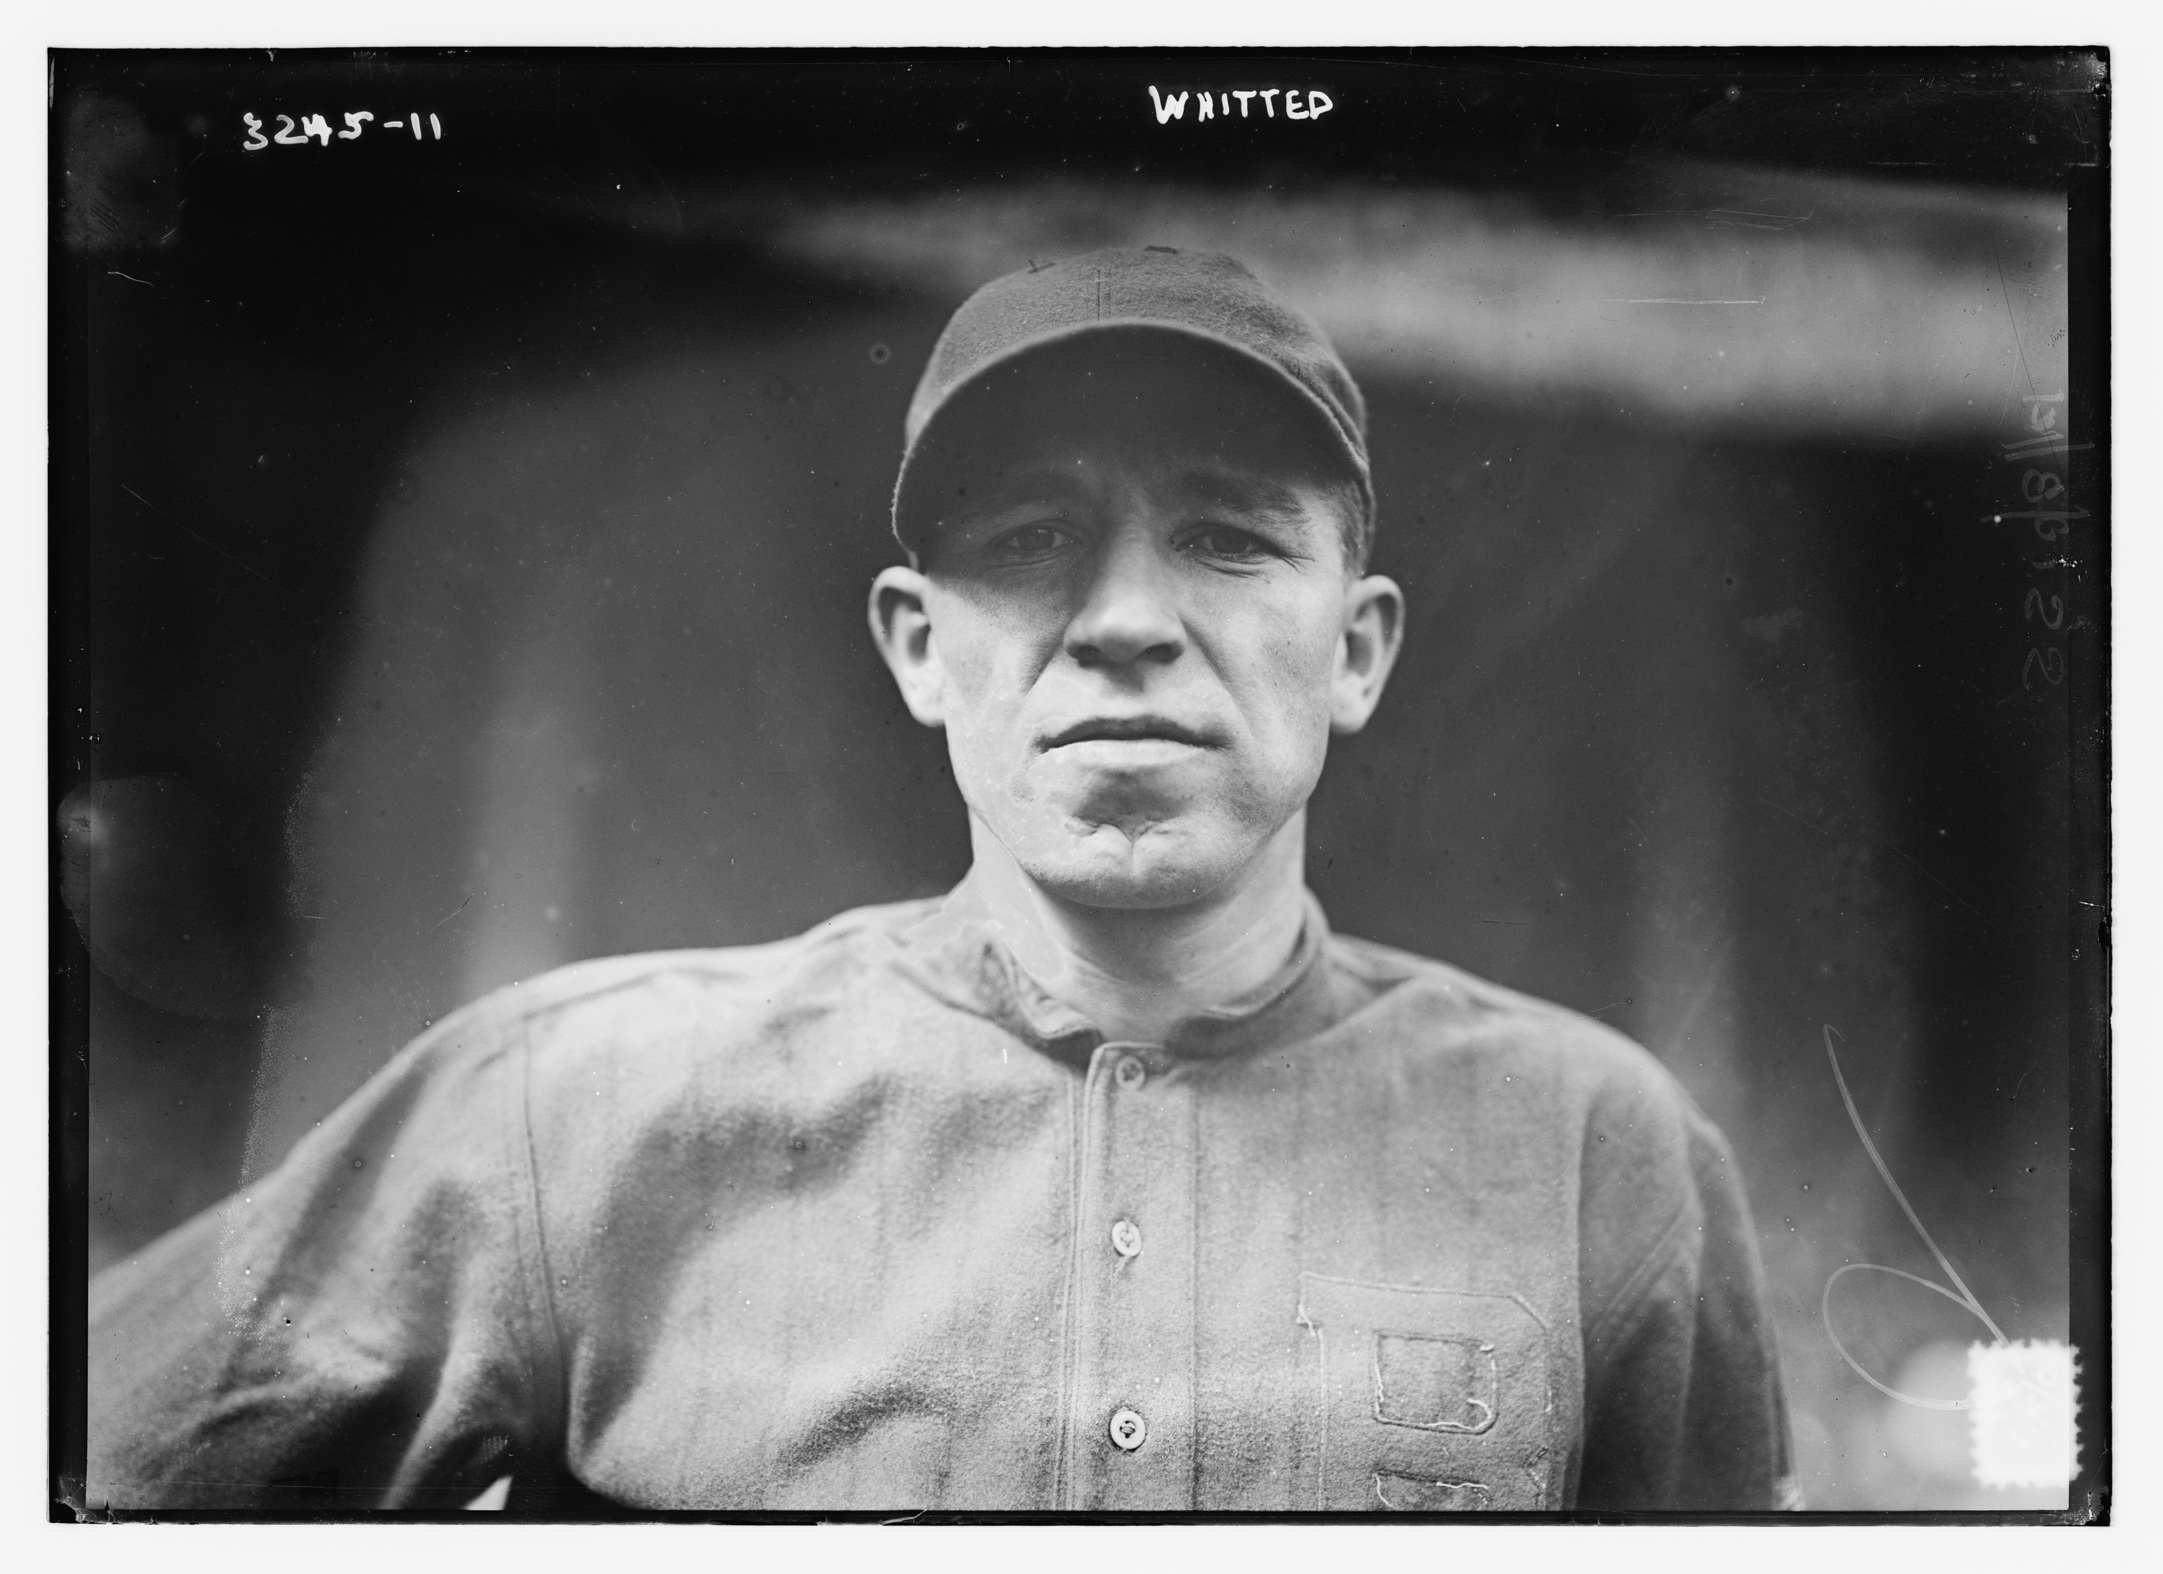 Right-handed hitting utilityman was acquired by Braves in June 1914. On the strength of 11 extra-base hits, a .293 batting average and 26 RBI in September and October, Whitted ended the season as a daily regular in George Stallings’s lineup.